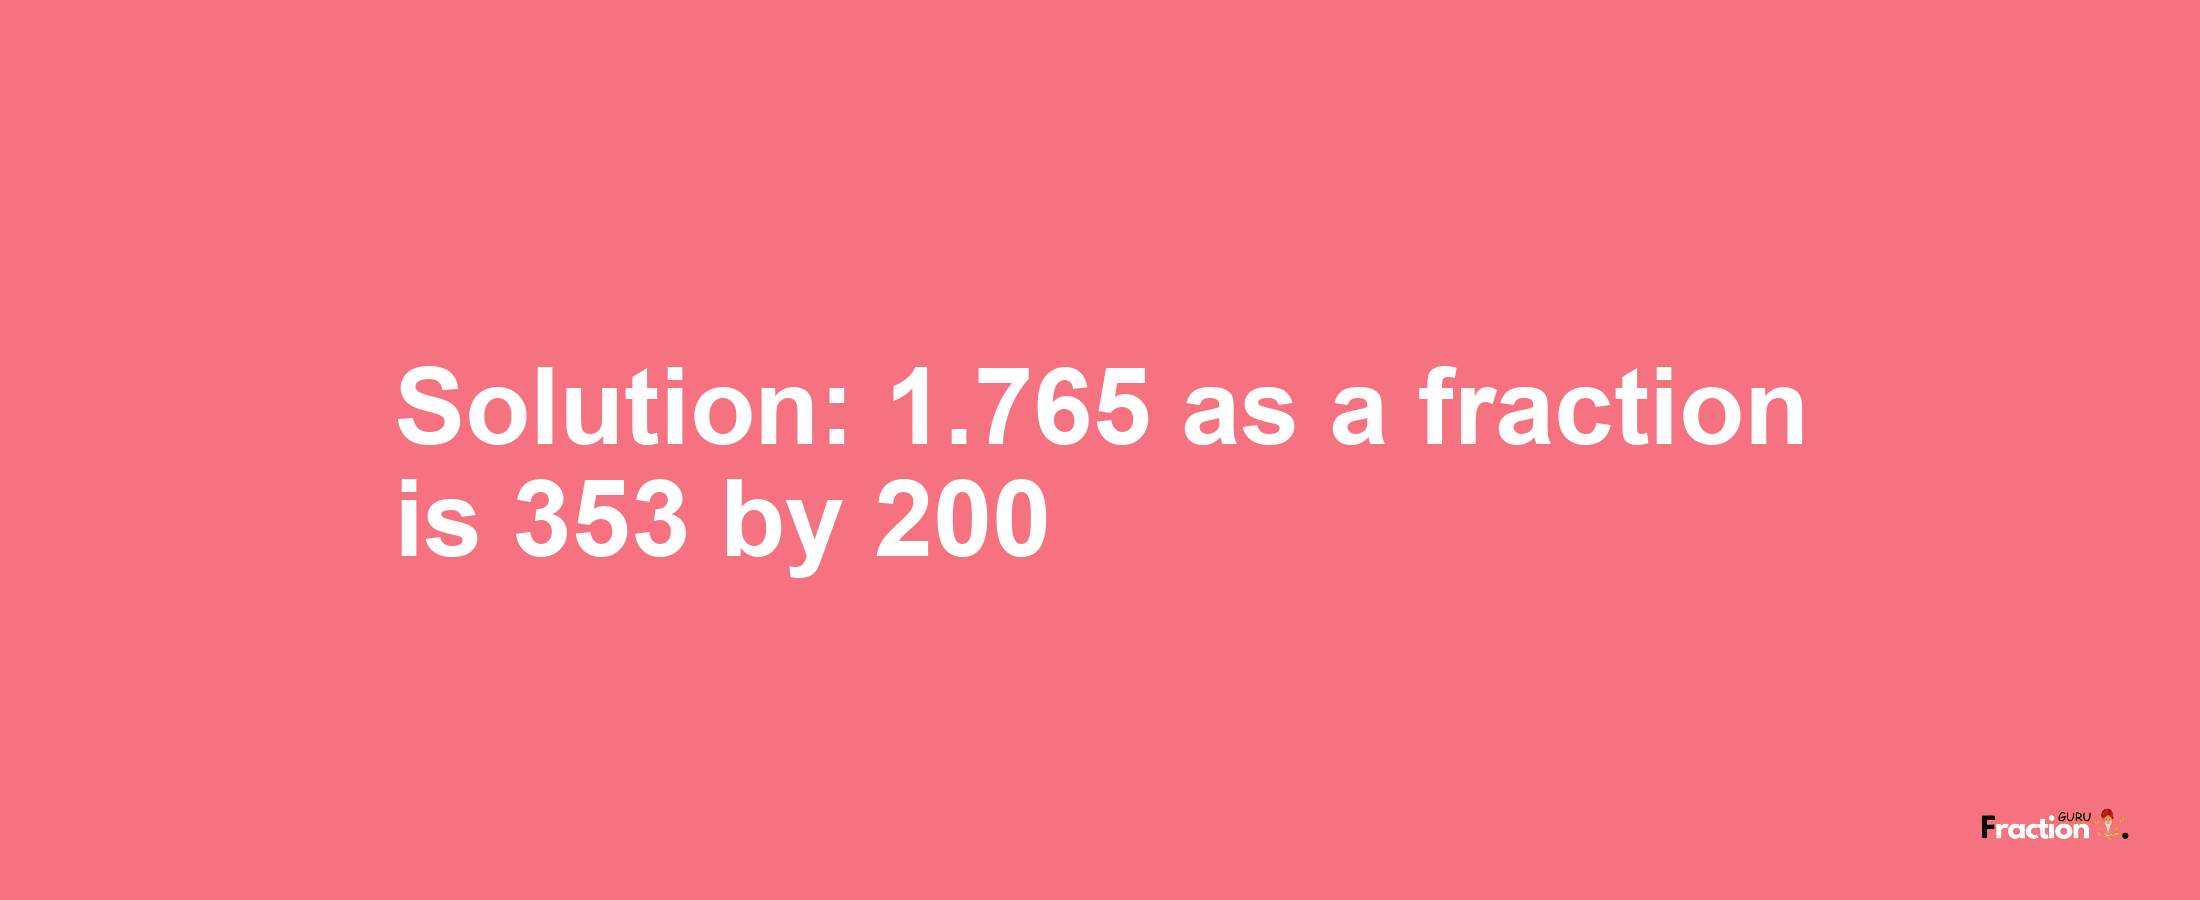 Solution:1.765 as a fraction is 353/200